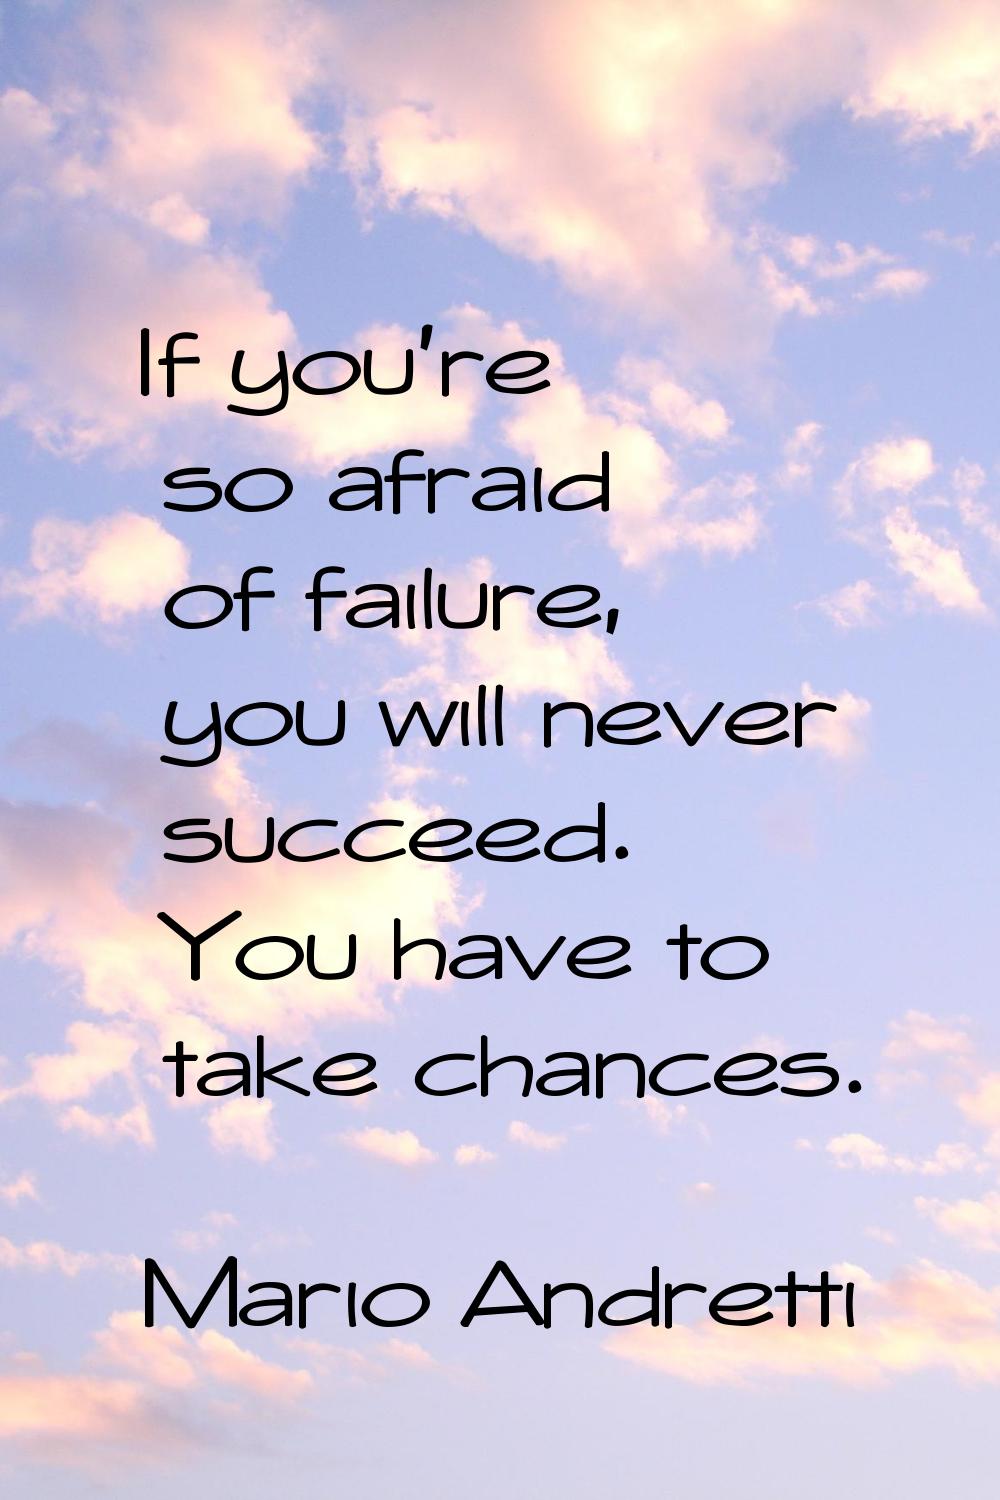 If you're so afraid of failure, you will never succeed. You have to take chances.